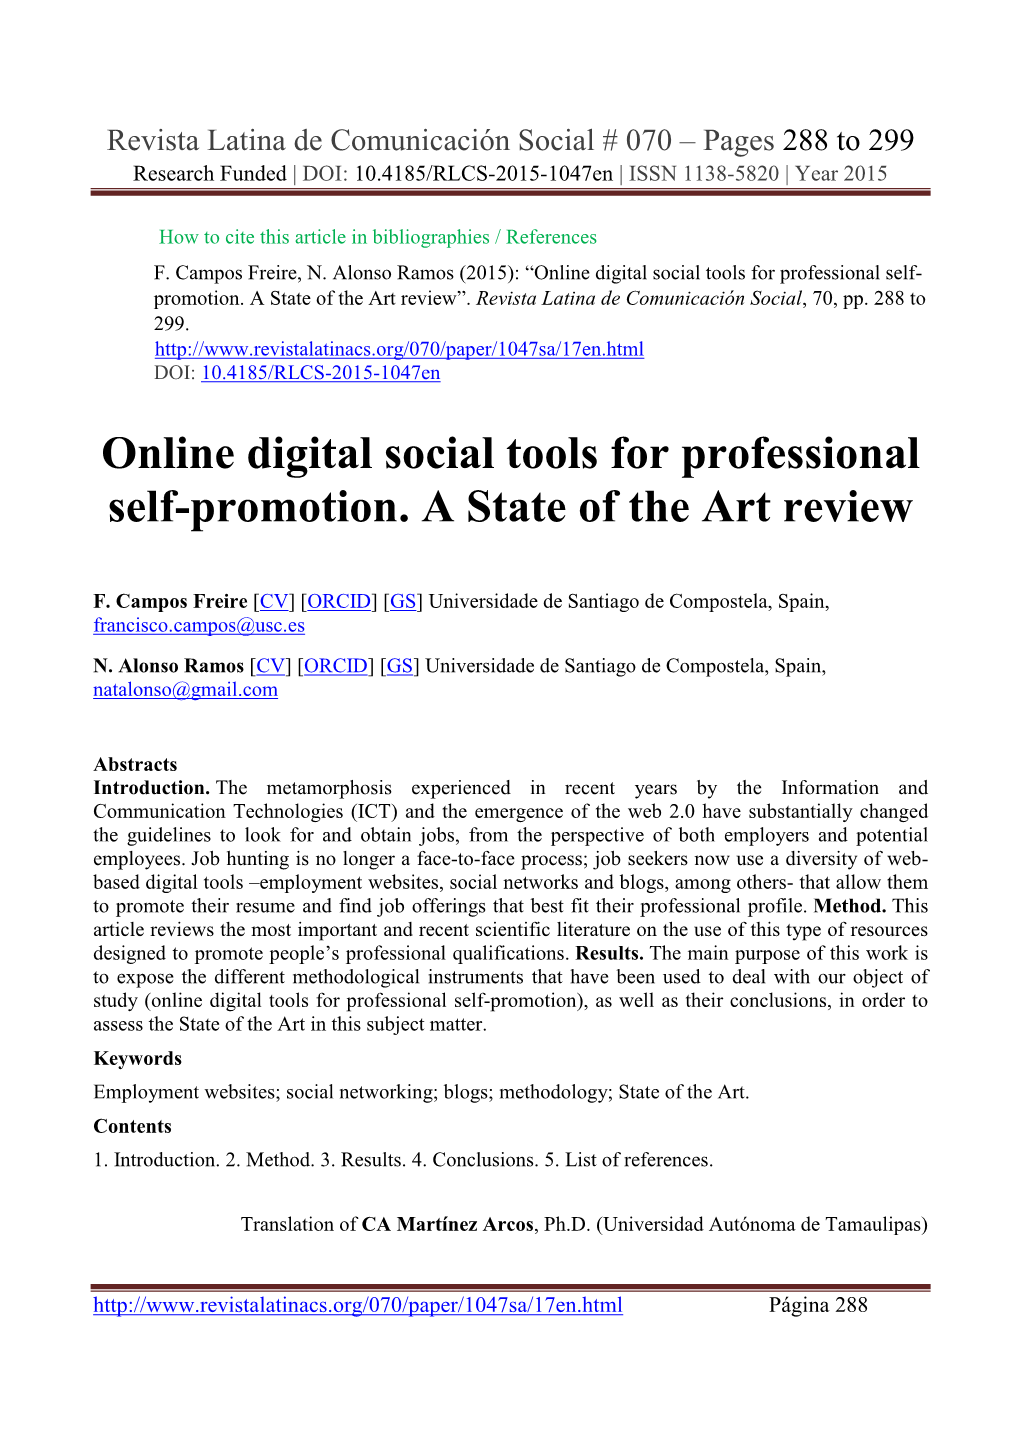 Online Digital Social Tools for Professional Self-Promotion. a State of the Art Review